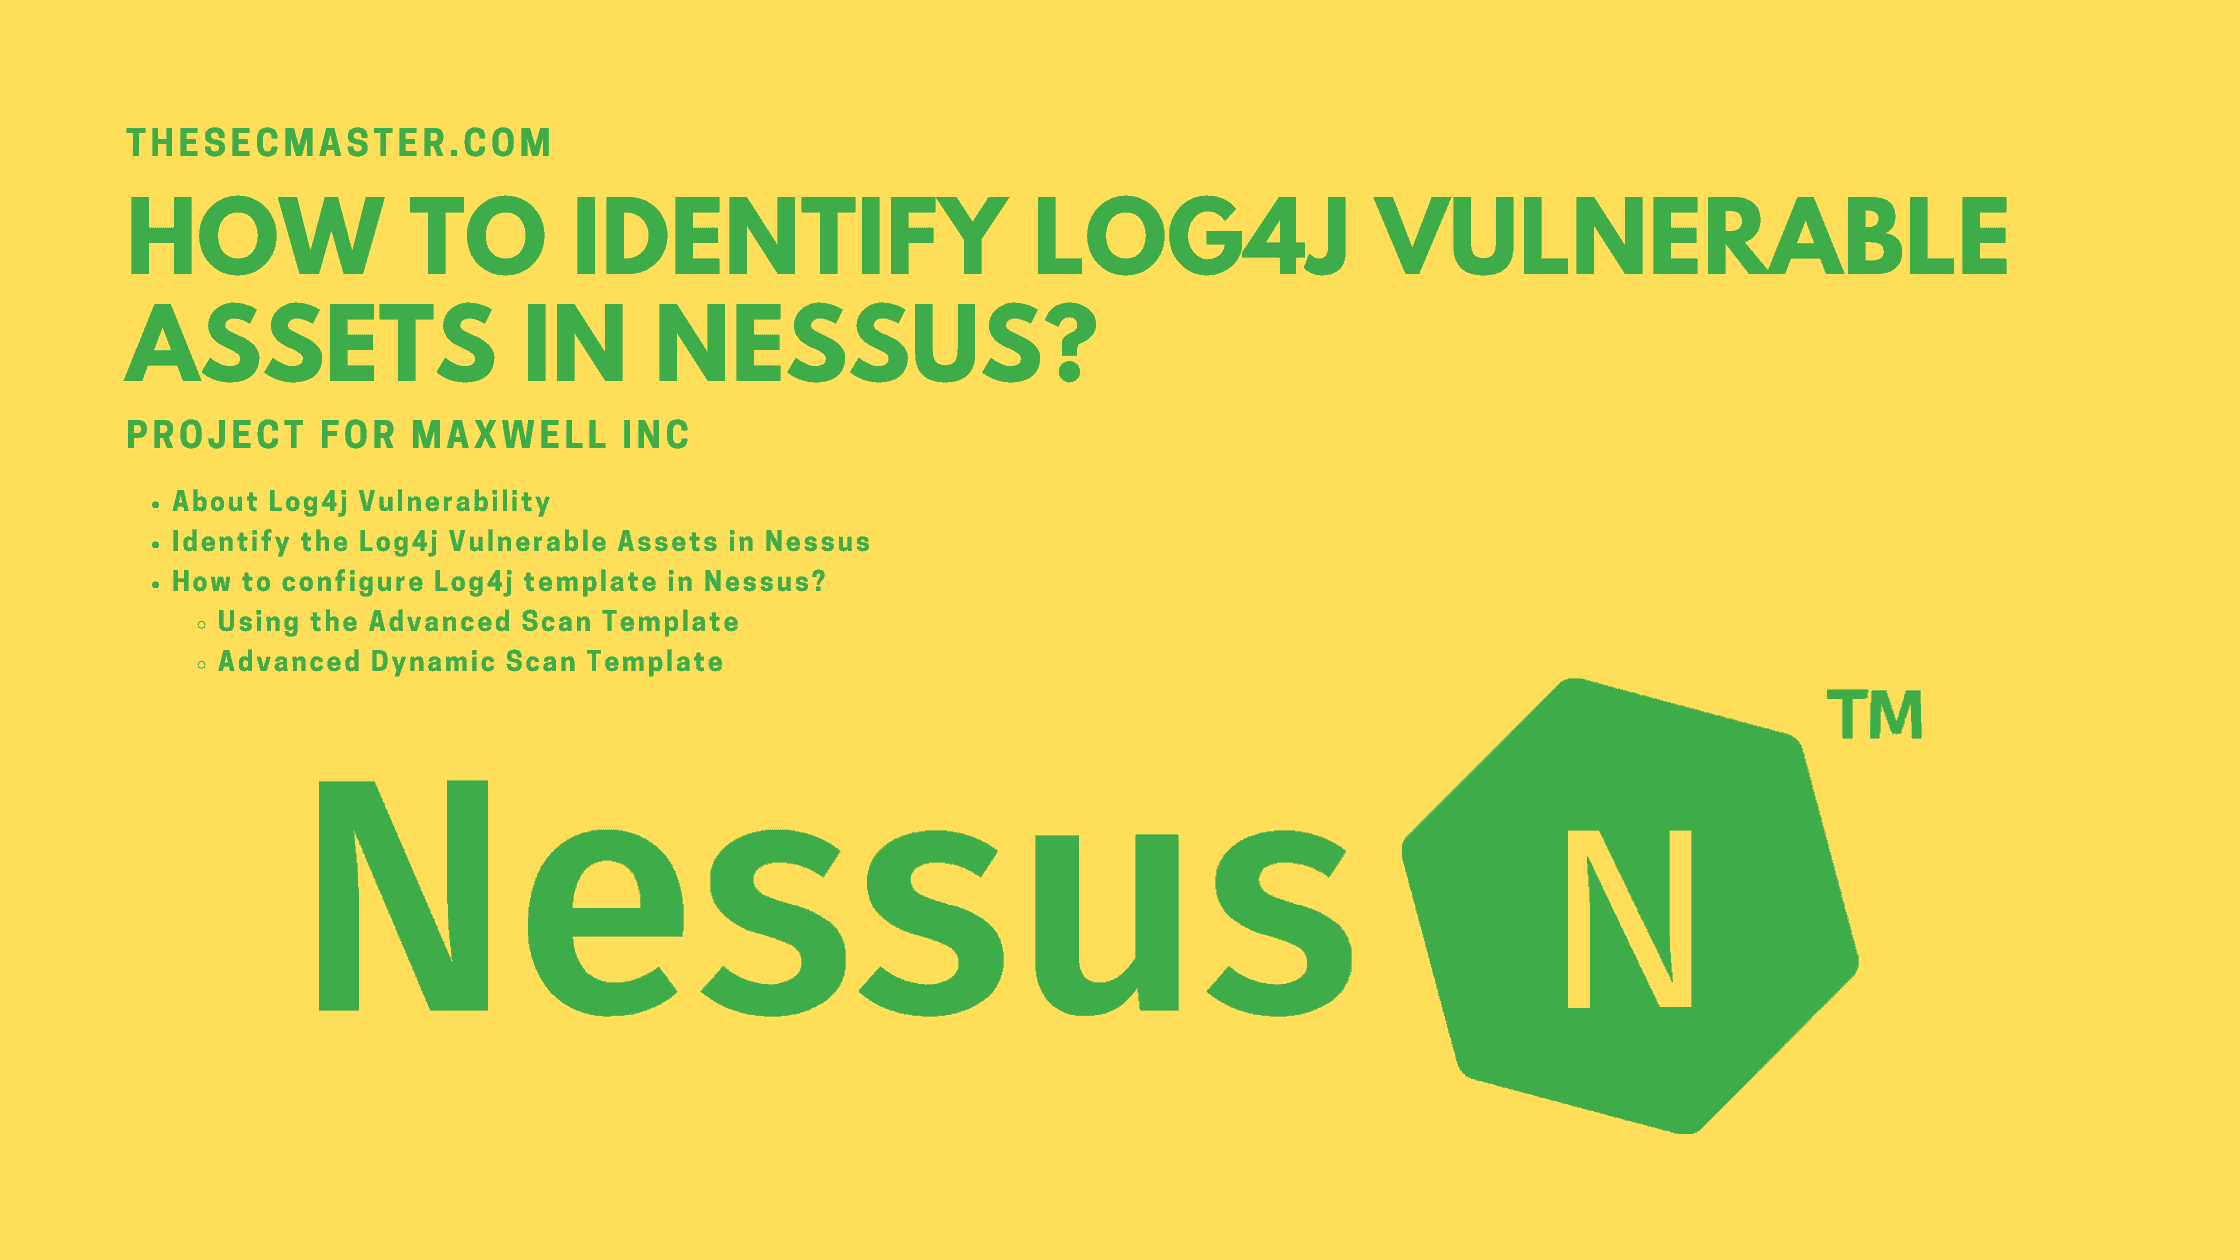 How To Identify Log4j Vulnerable Assets In Nessus